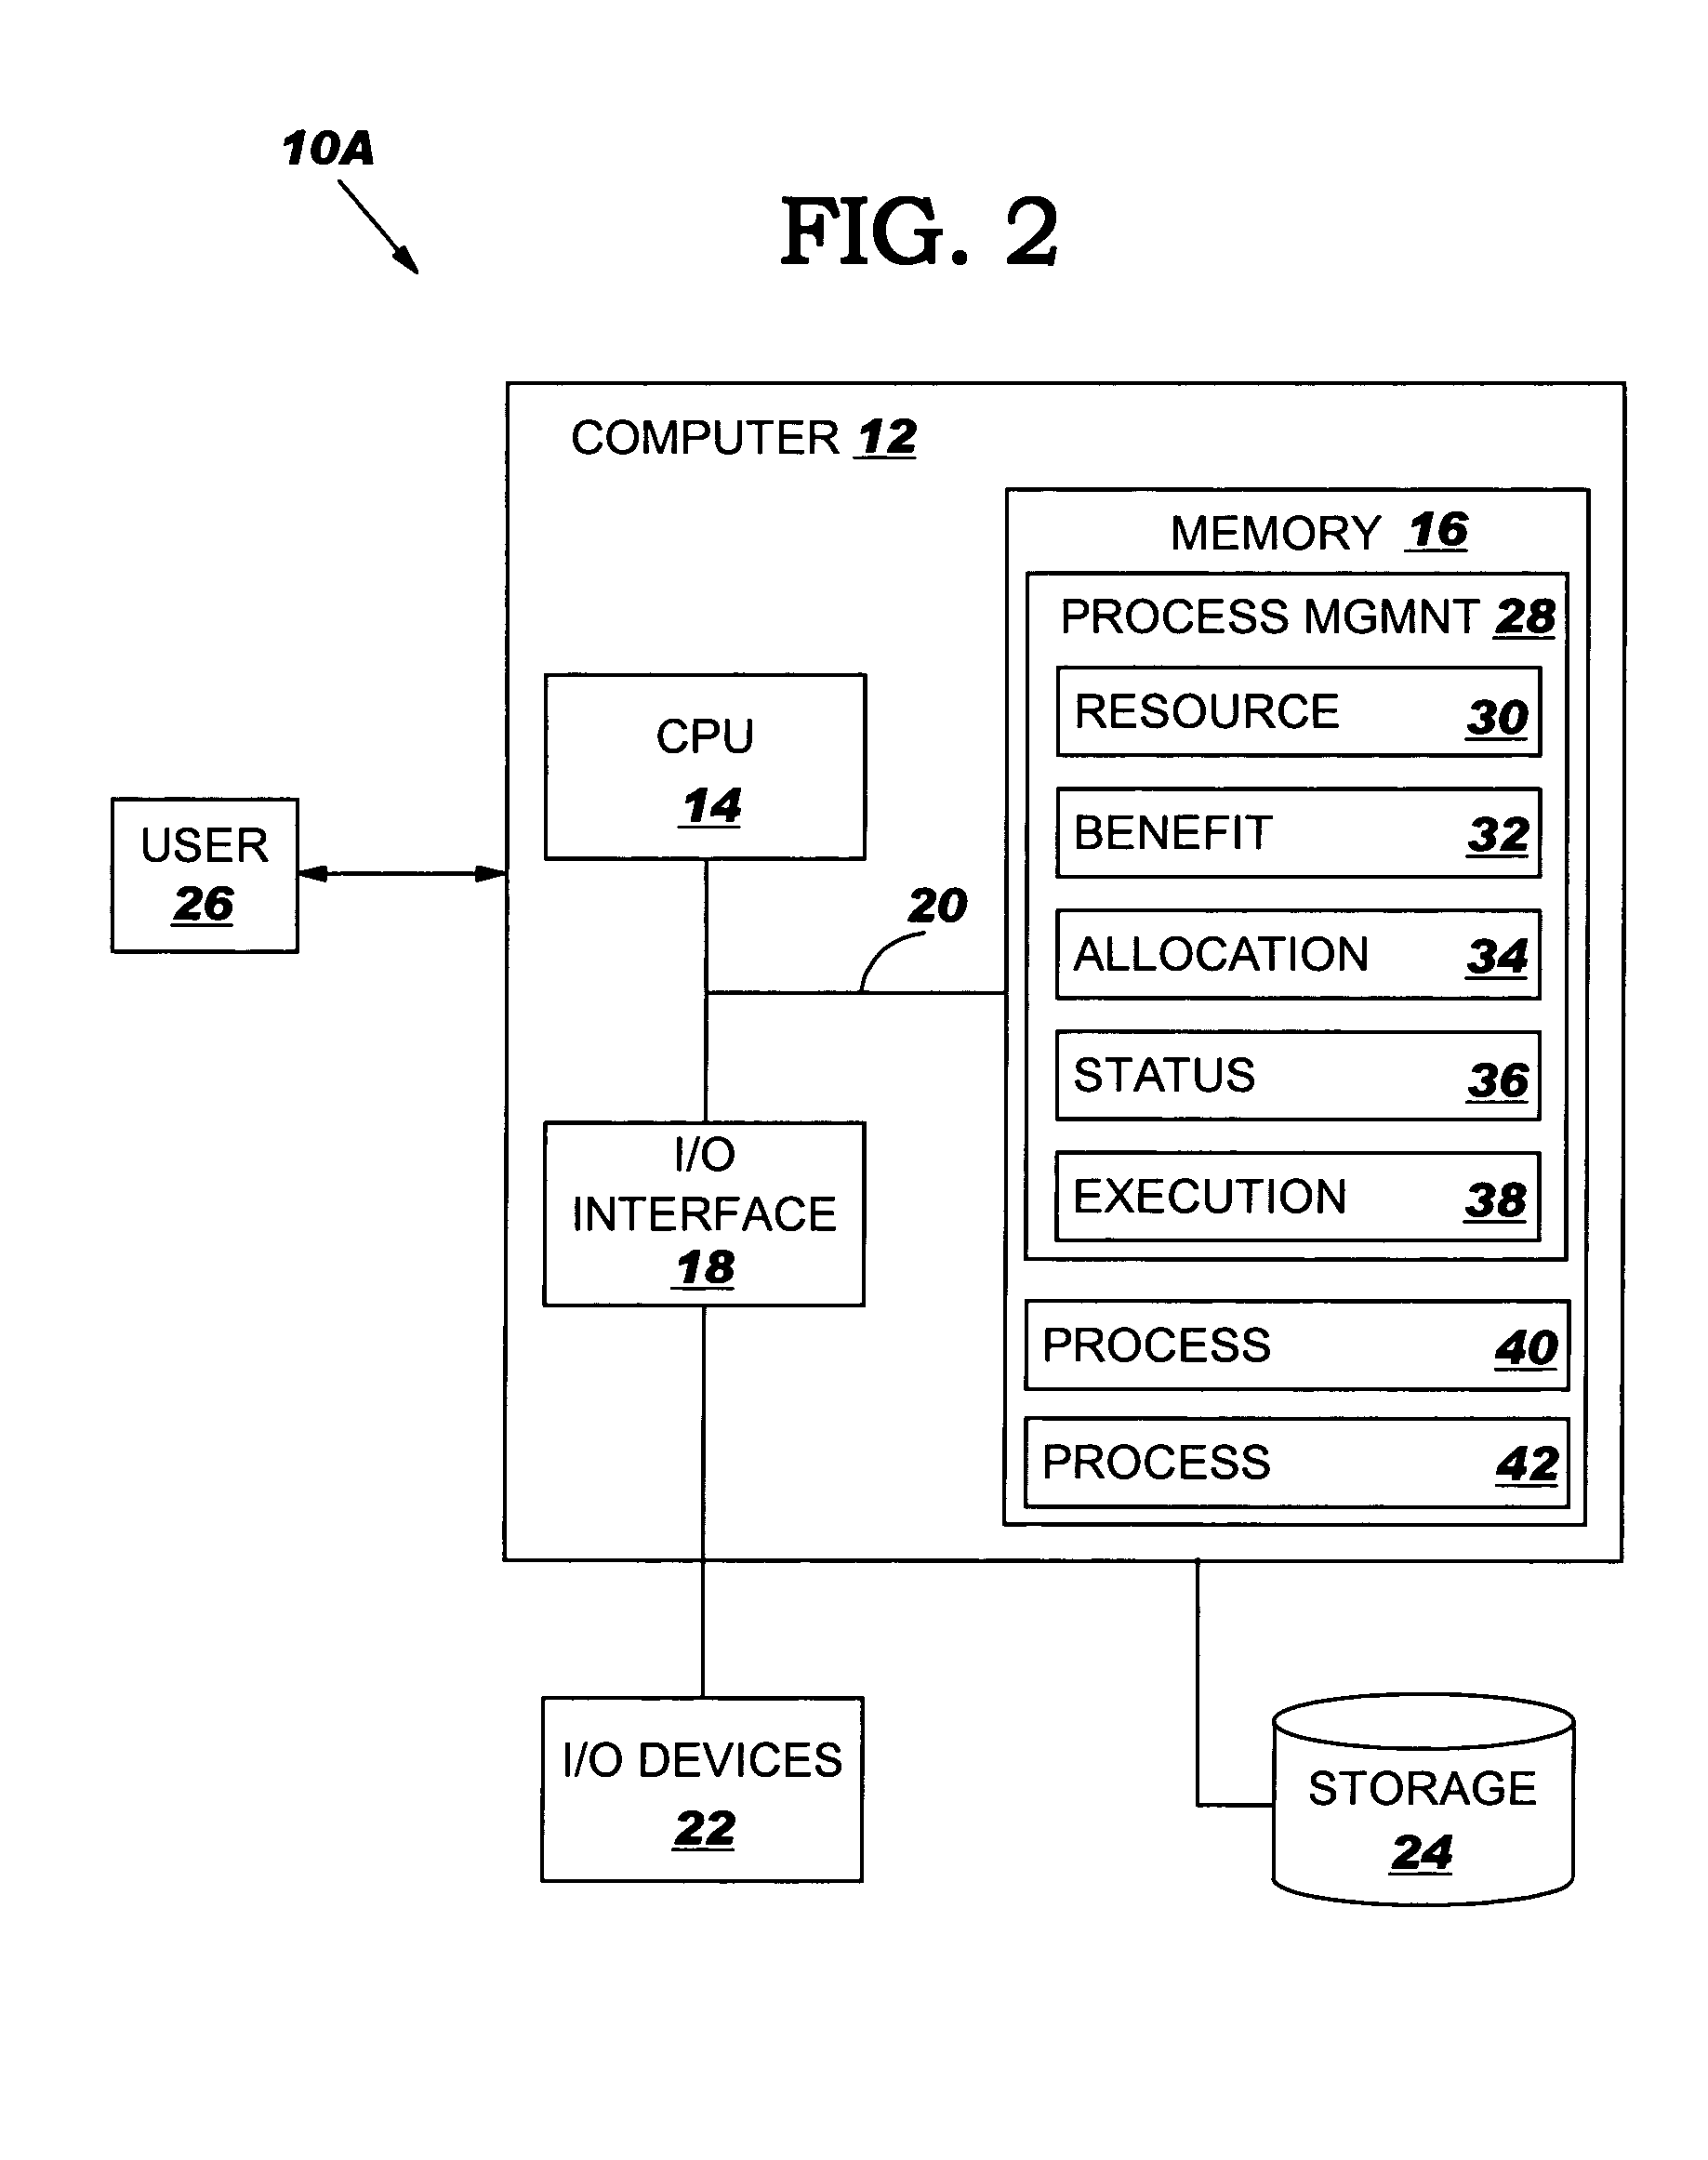 Autonomic method, system and program product for managing processes